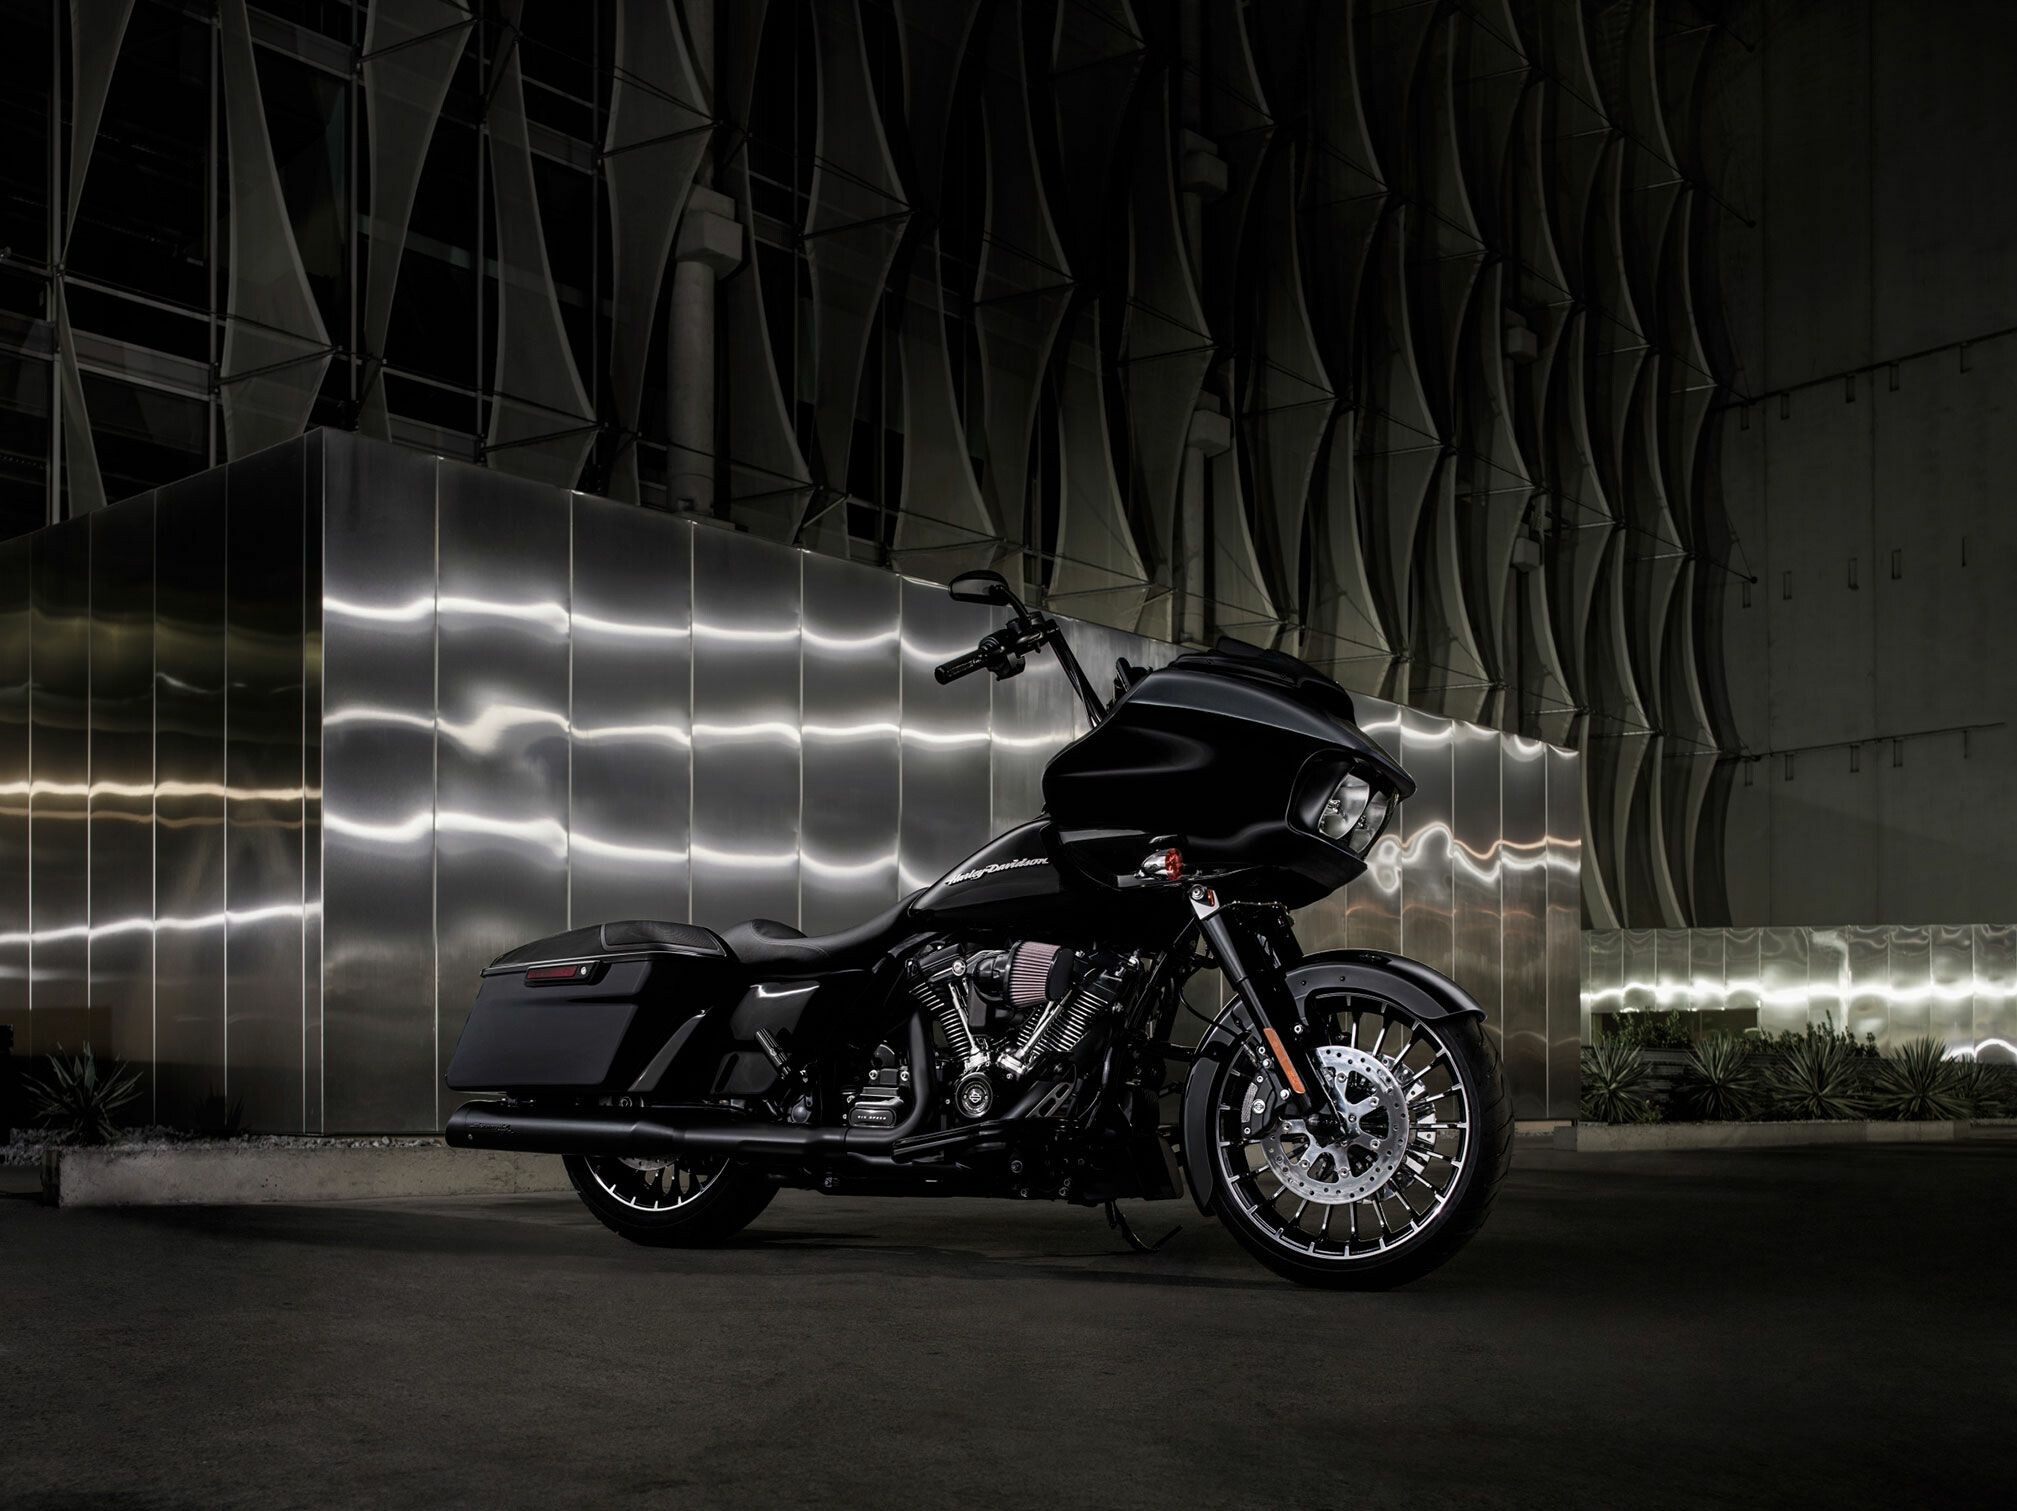 Harley-Davidson Glide: Road Glide, Introduced in 1998 as an evolution of the FLT Tour Glide. 2020x1520 HD Wallpaper.